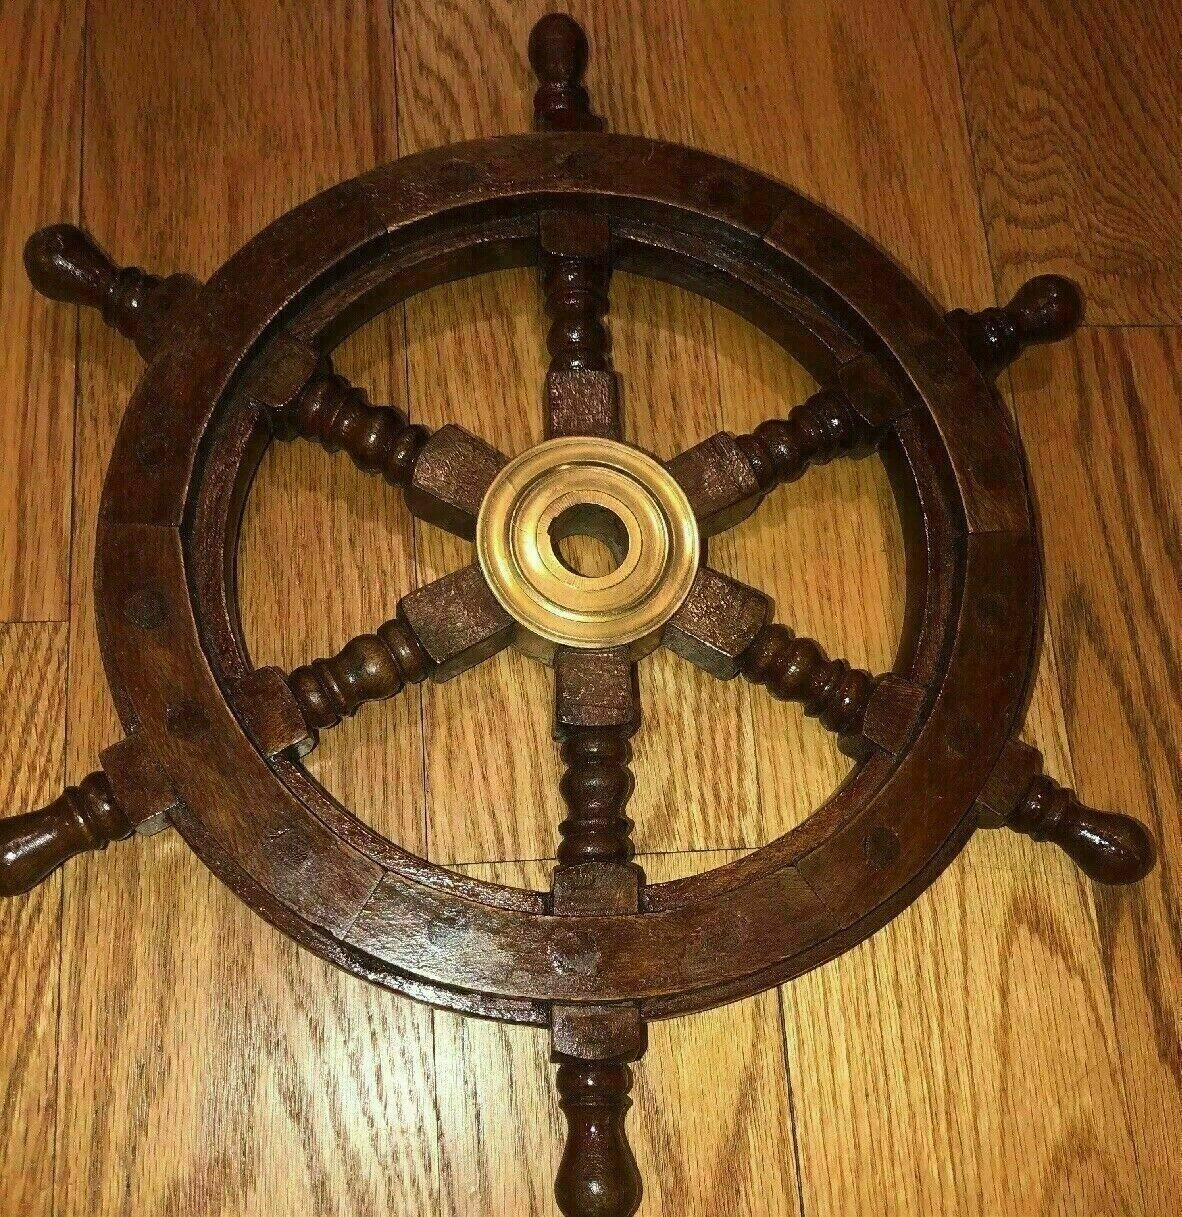 New Solid Nautical Wooden Ship Steering Wheel Pirate Décor Handmade gift